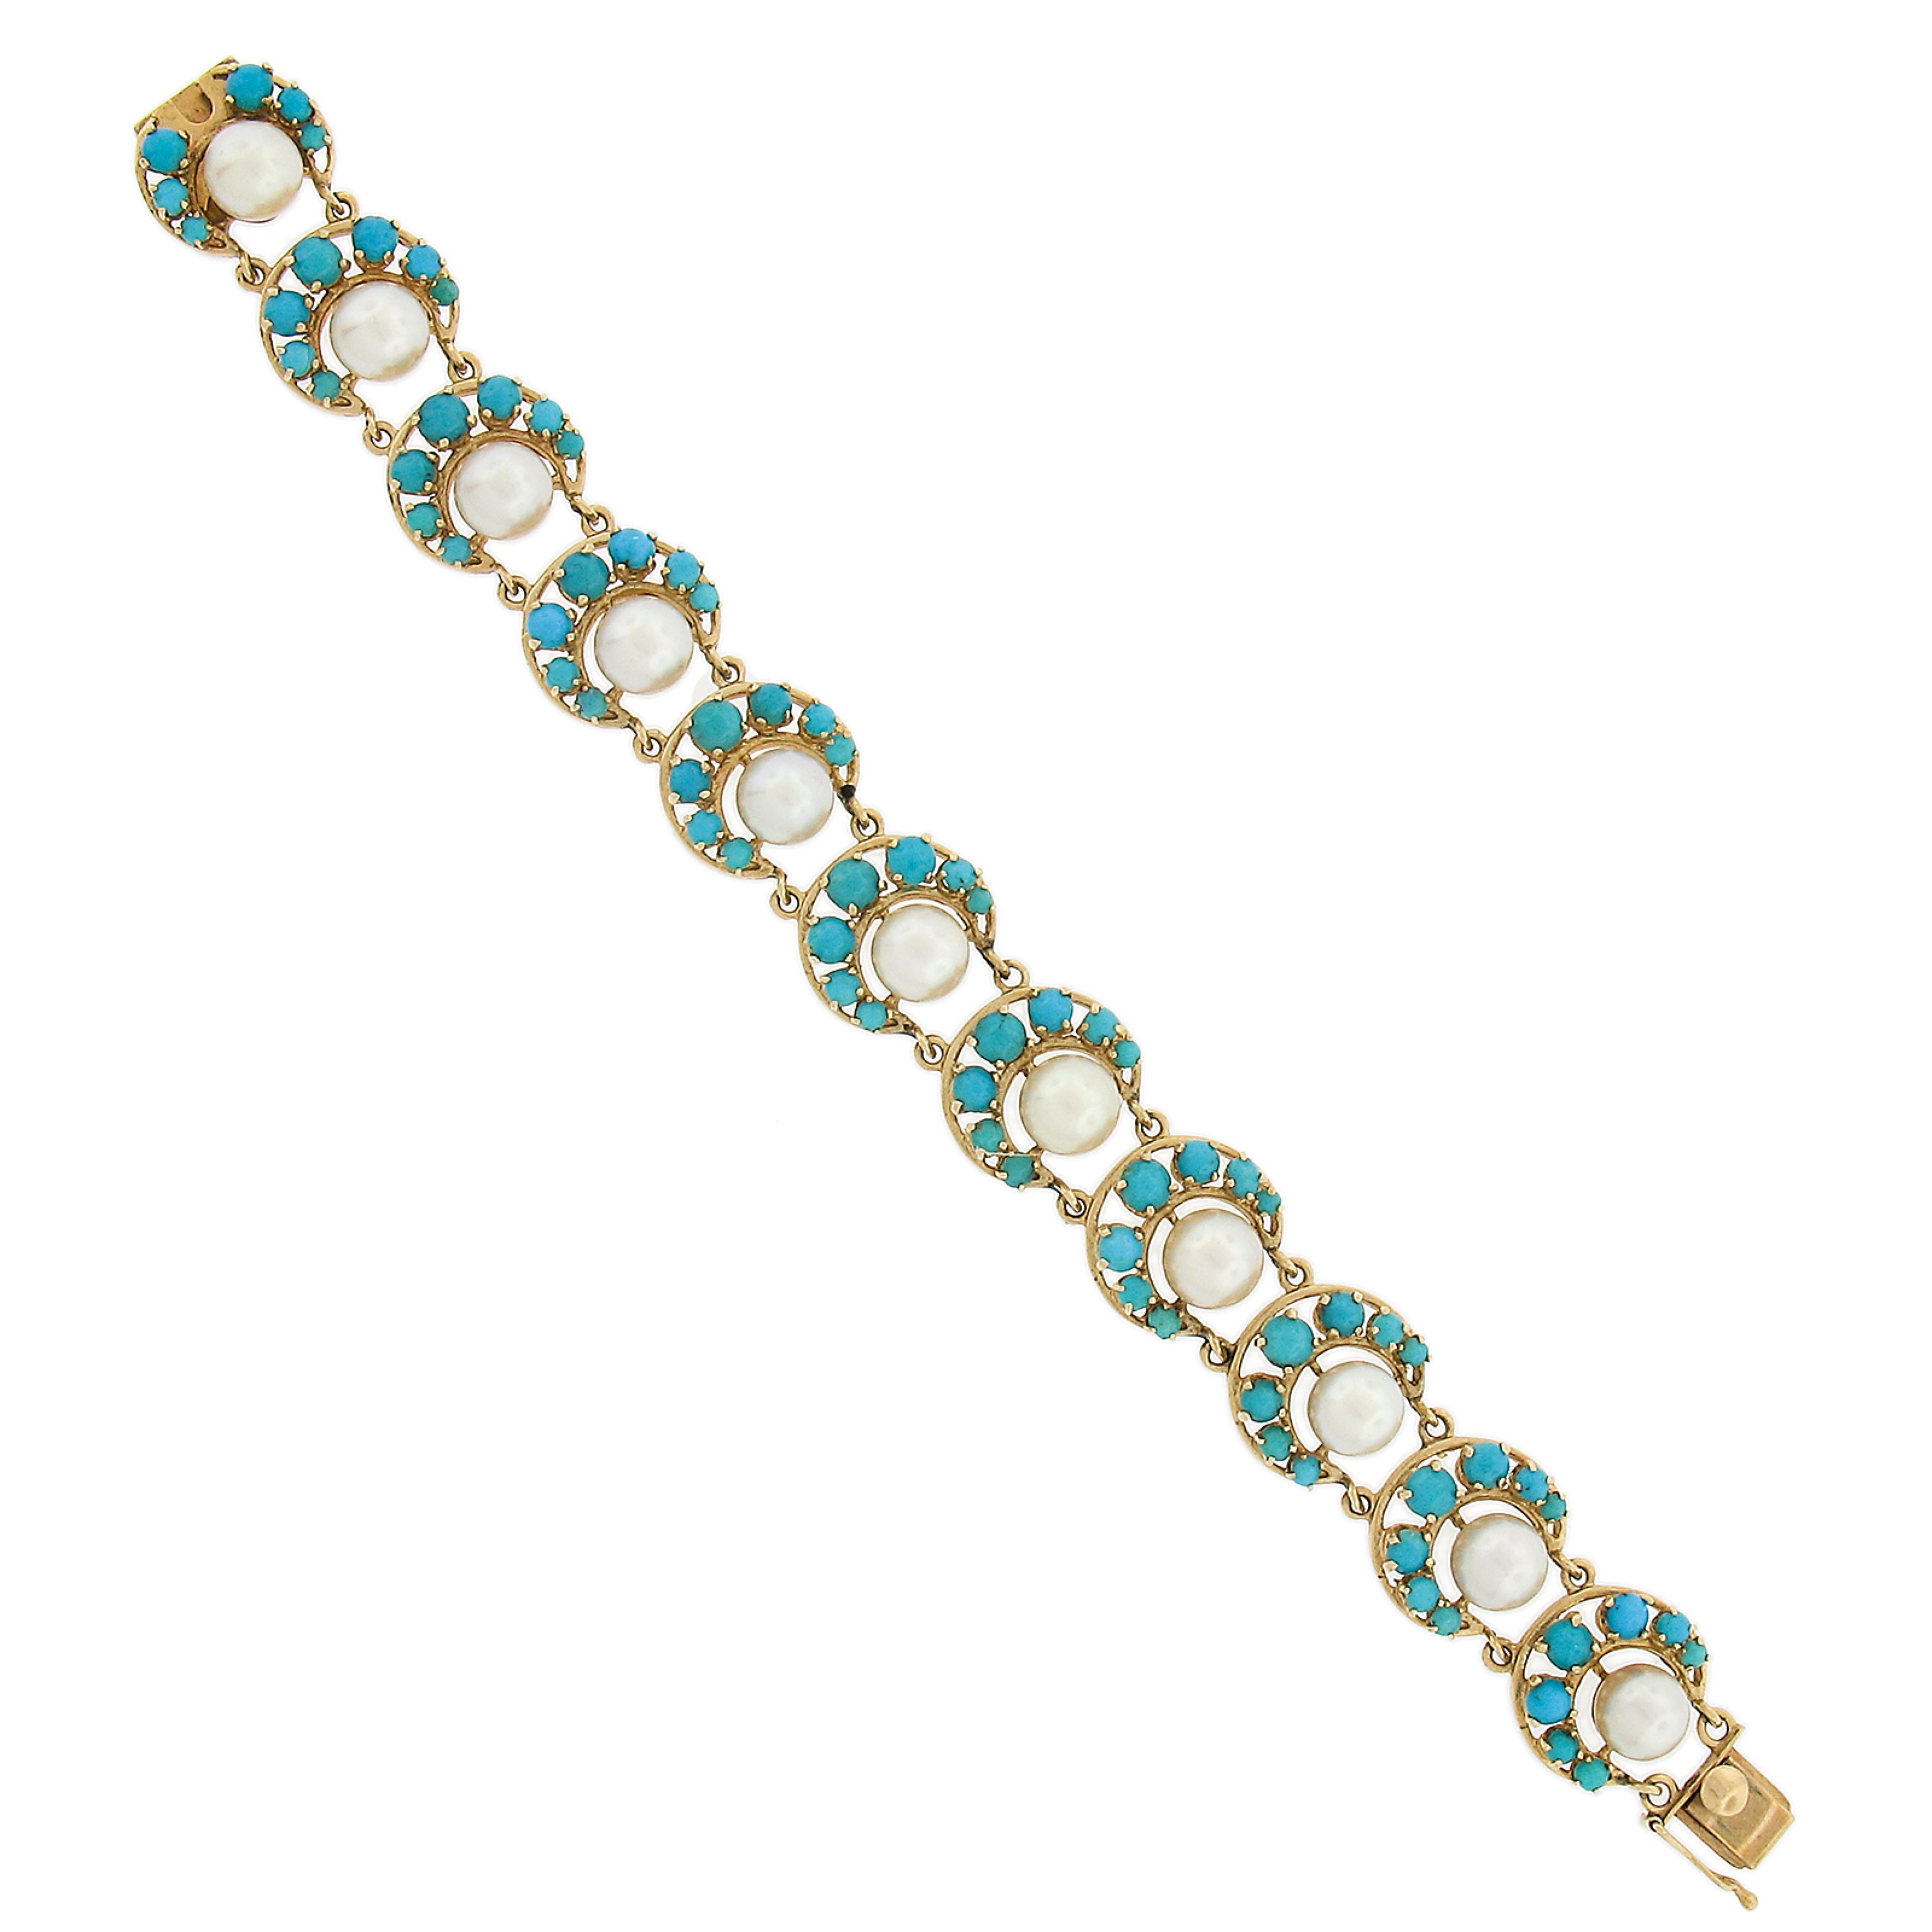 Women's Vintage 14K Yellow Gold Pearls & Turquoise Horseshoe or Crescent Link Bracelet For Sale